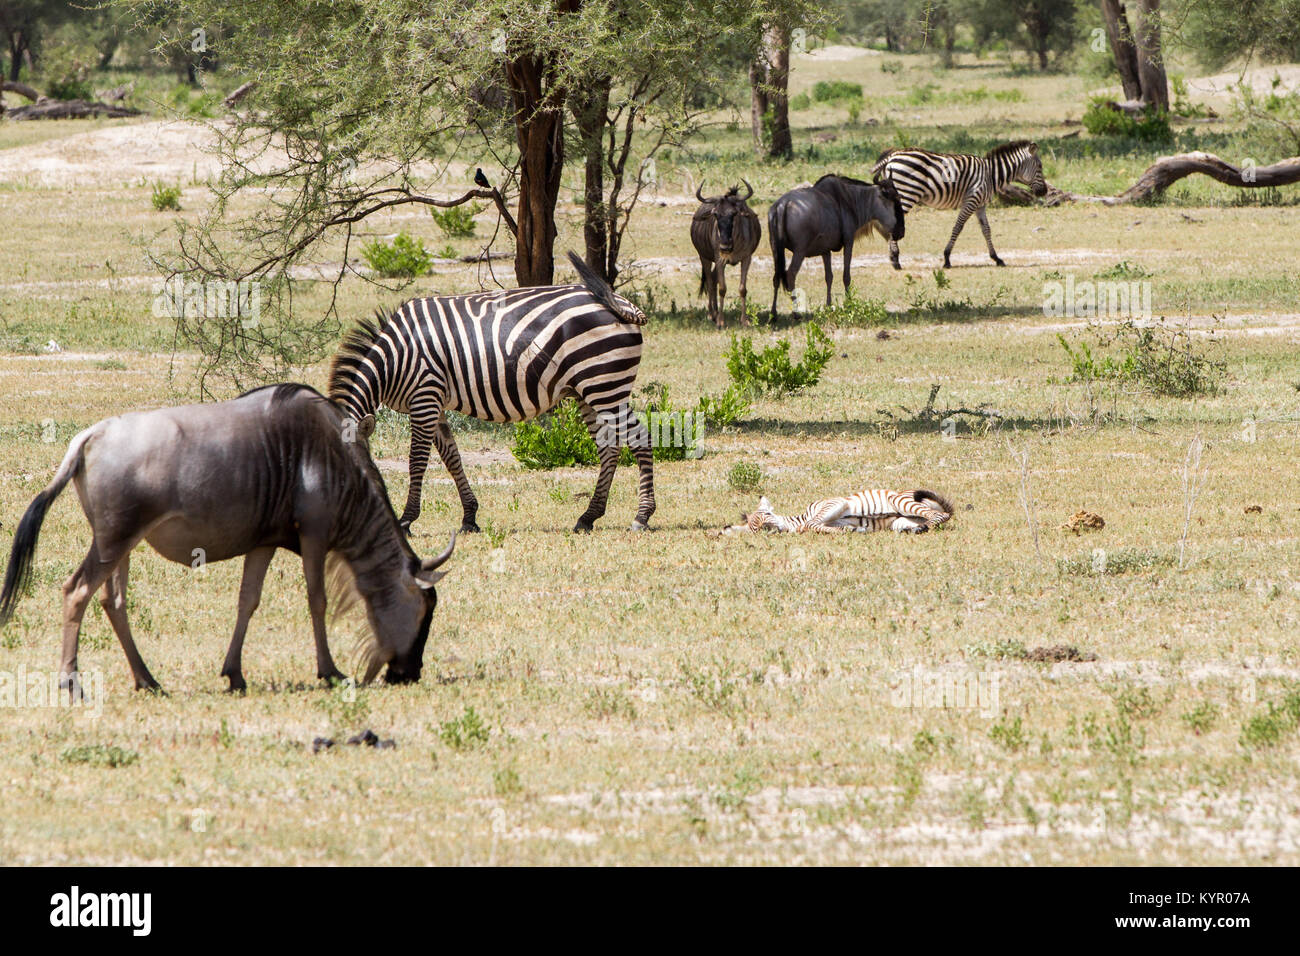 Zebra species of African equids (horse family) united by their distinctive black and white striped coats in different patterns, unique to each individ Stock Photo